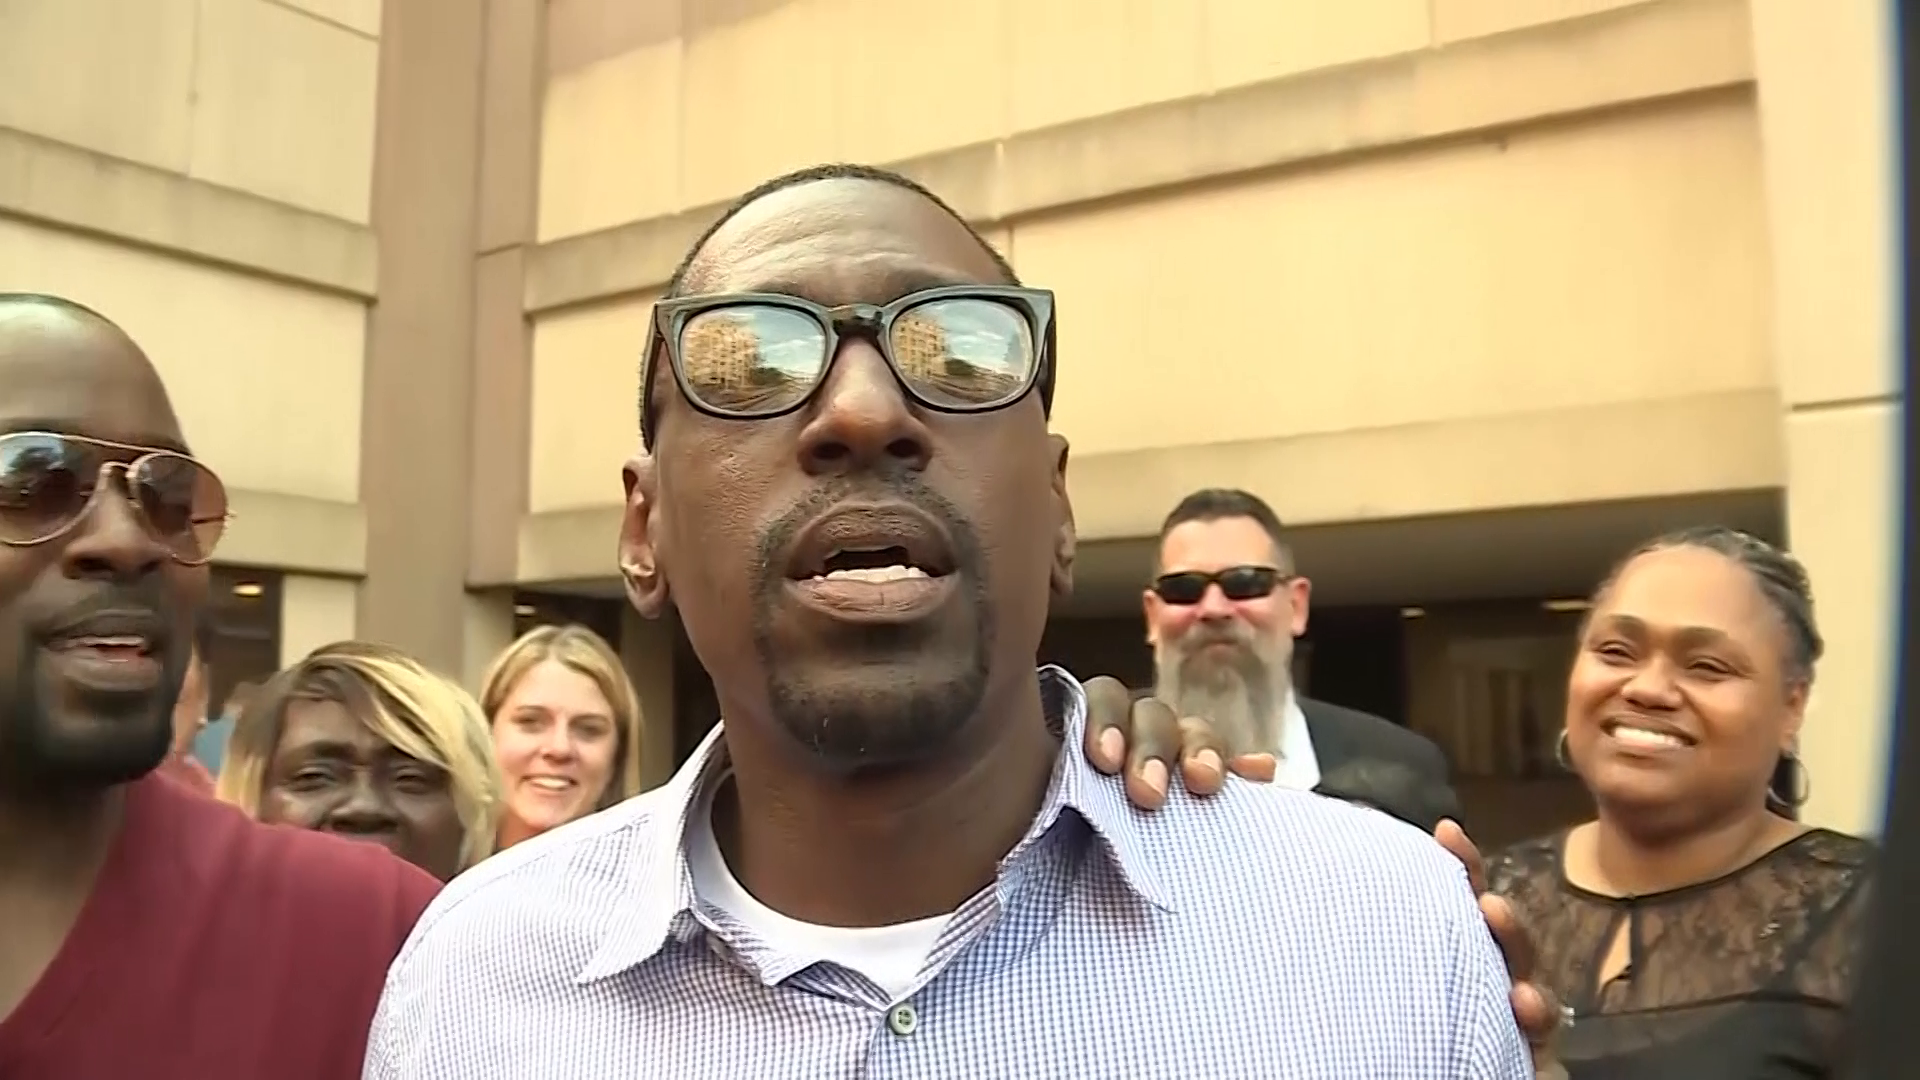 Man wrongly imprisoned for 23 years finally set free